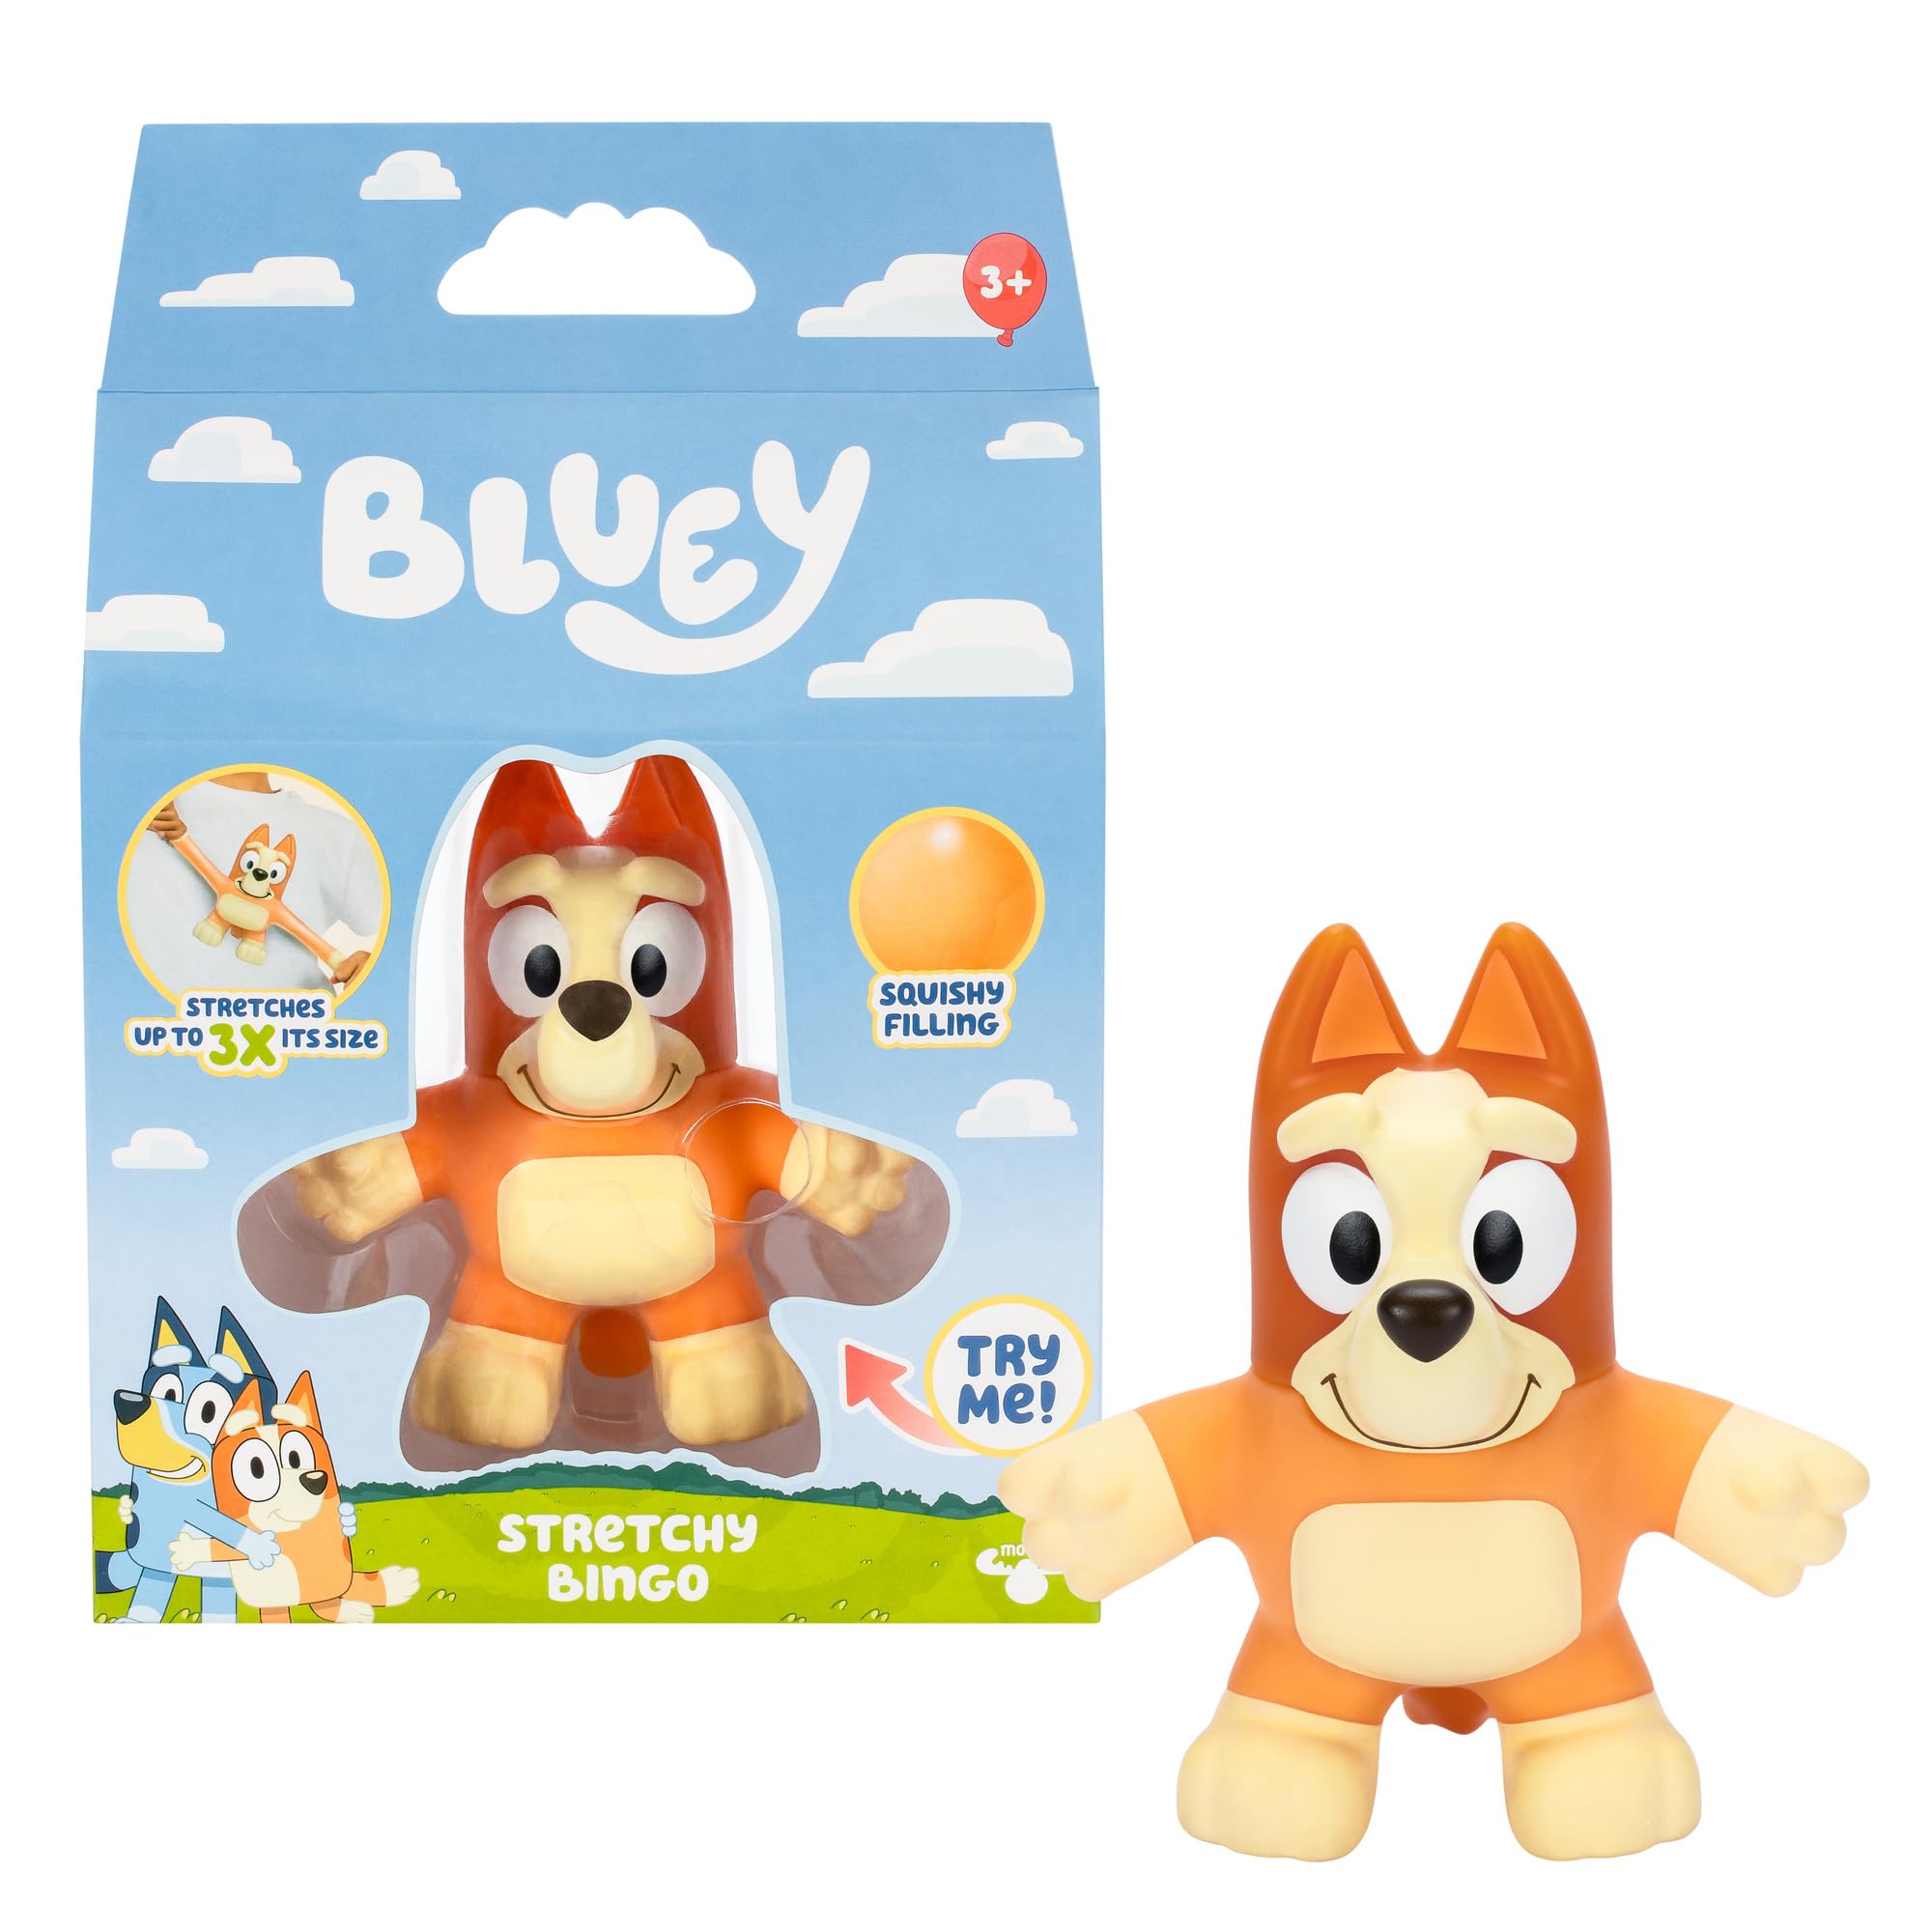 Stretchy Bingo | Super Stretchy Toy Figure of Bingo with Squishy Filling | Stretch Her Up to 3 Times Her Size